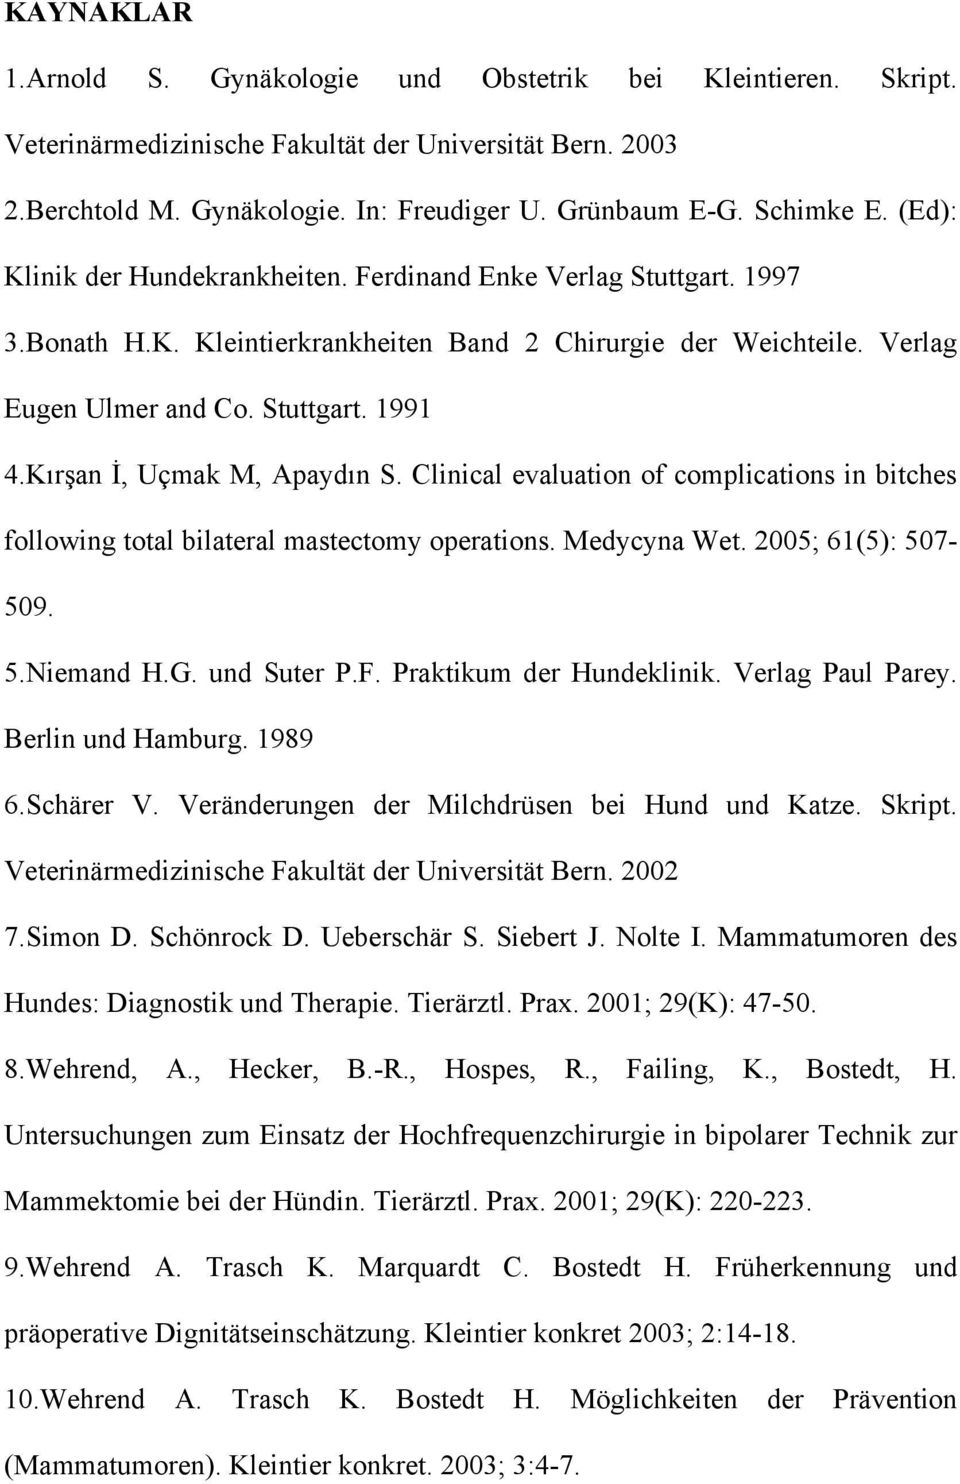 Kırşan İ, Uçmak M, Apaydın S. Clinical evaluation of complications in bitches following total bilateral mastectomy operations. Medycyna Wet. 2005; 61(5): 507-509. 5.Niemand H.G. und Suter P.F.